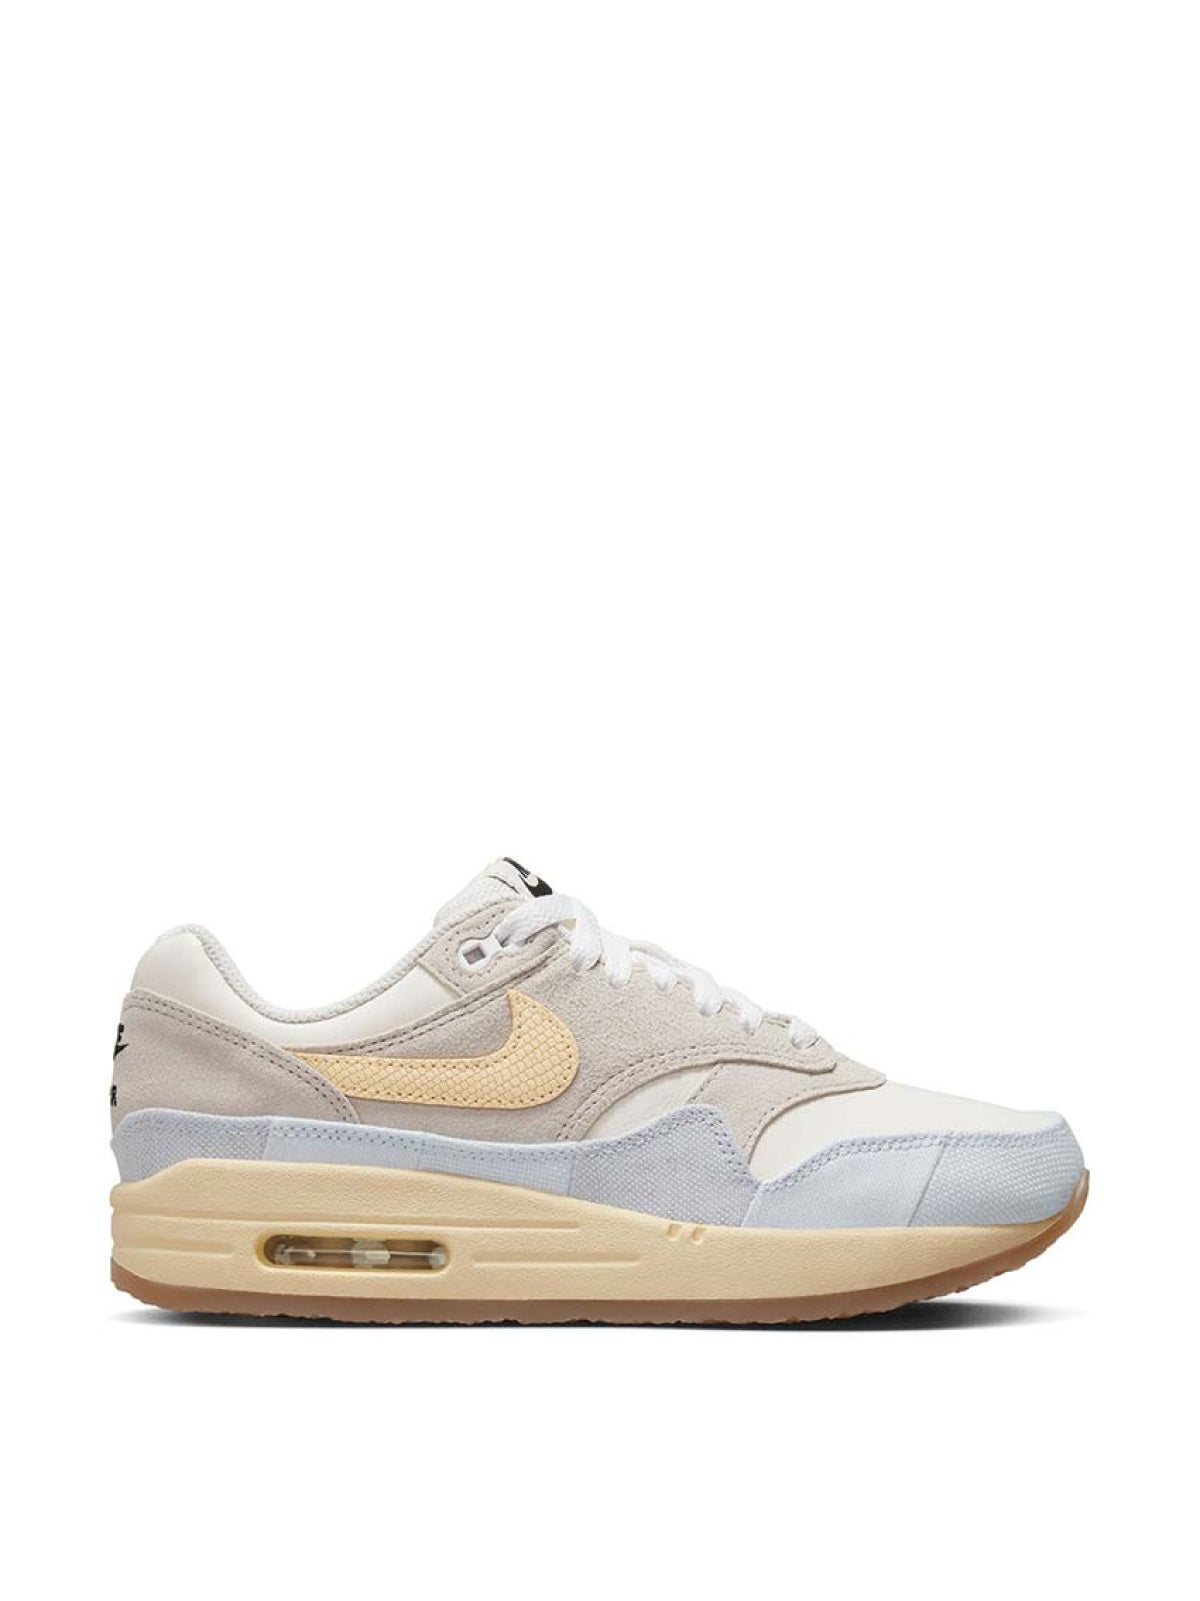 Nike-OUTLET-SALE-Air Max 1 '87 Sneakers-ARCHIVIST